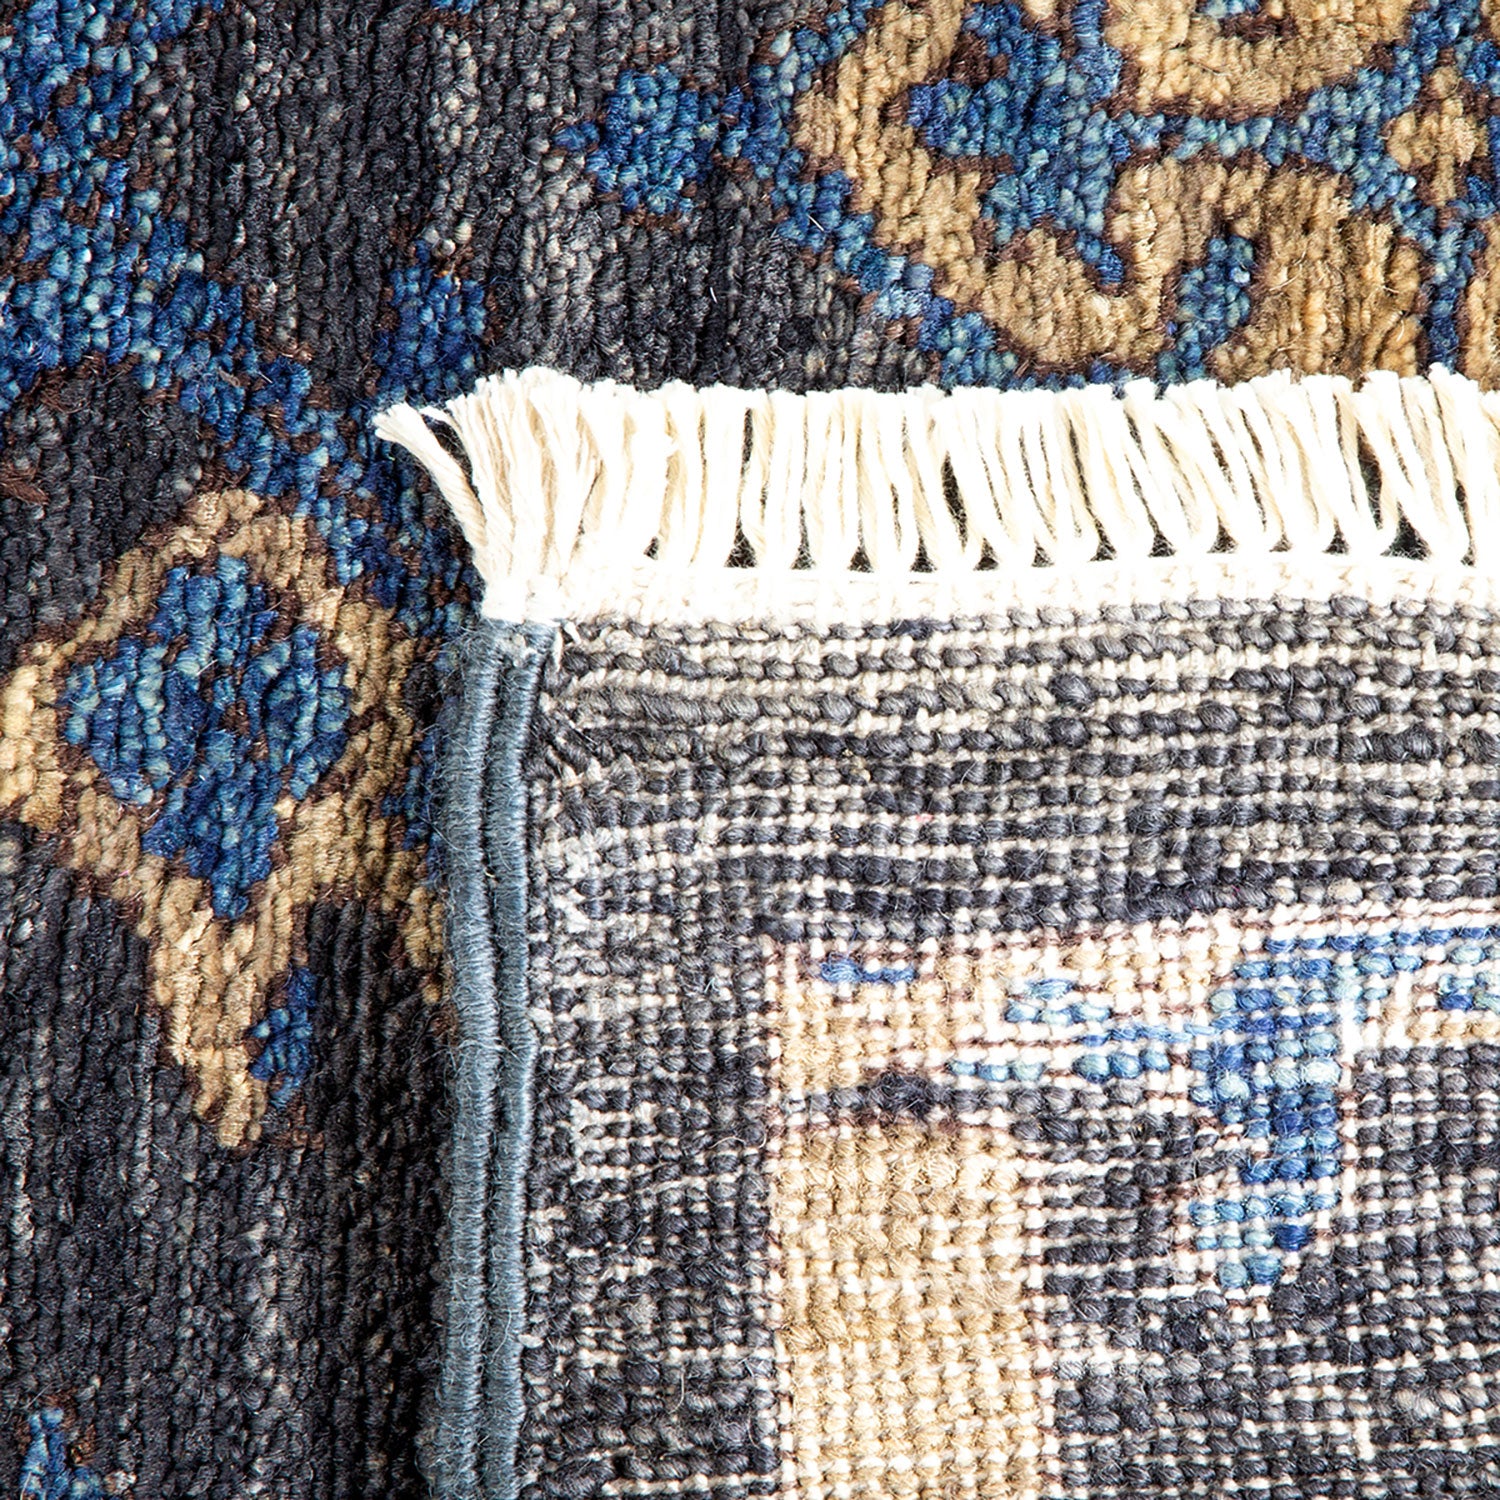 Close-up of a high-quality, detailed patterned rug with white fringe.